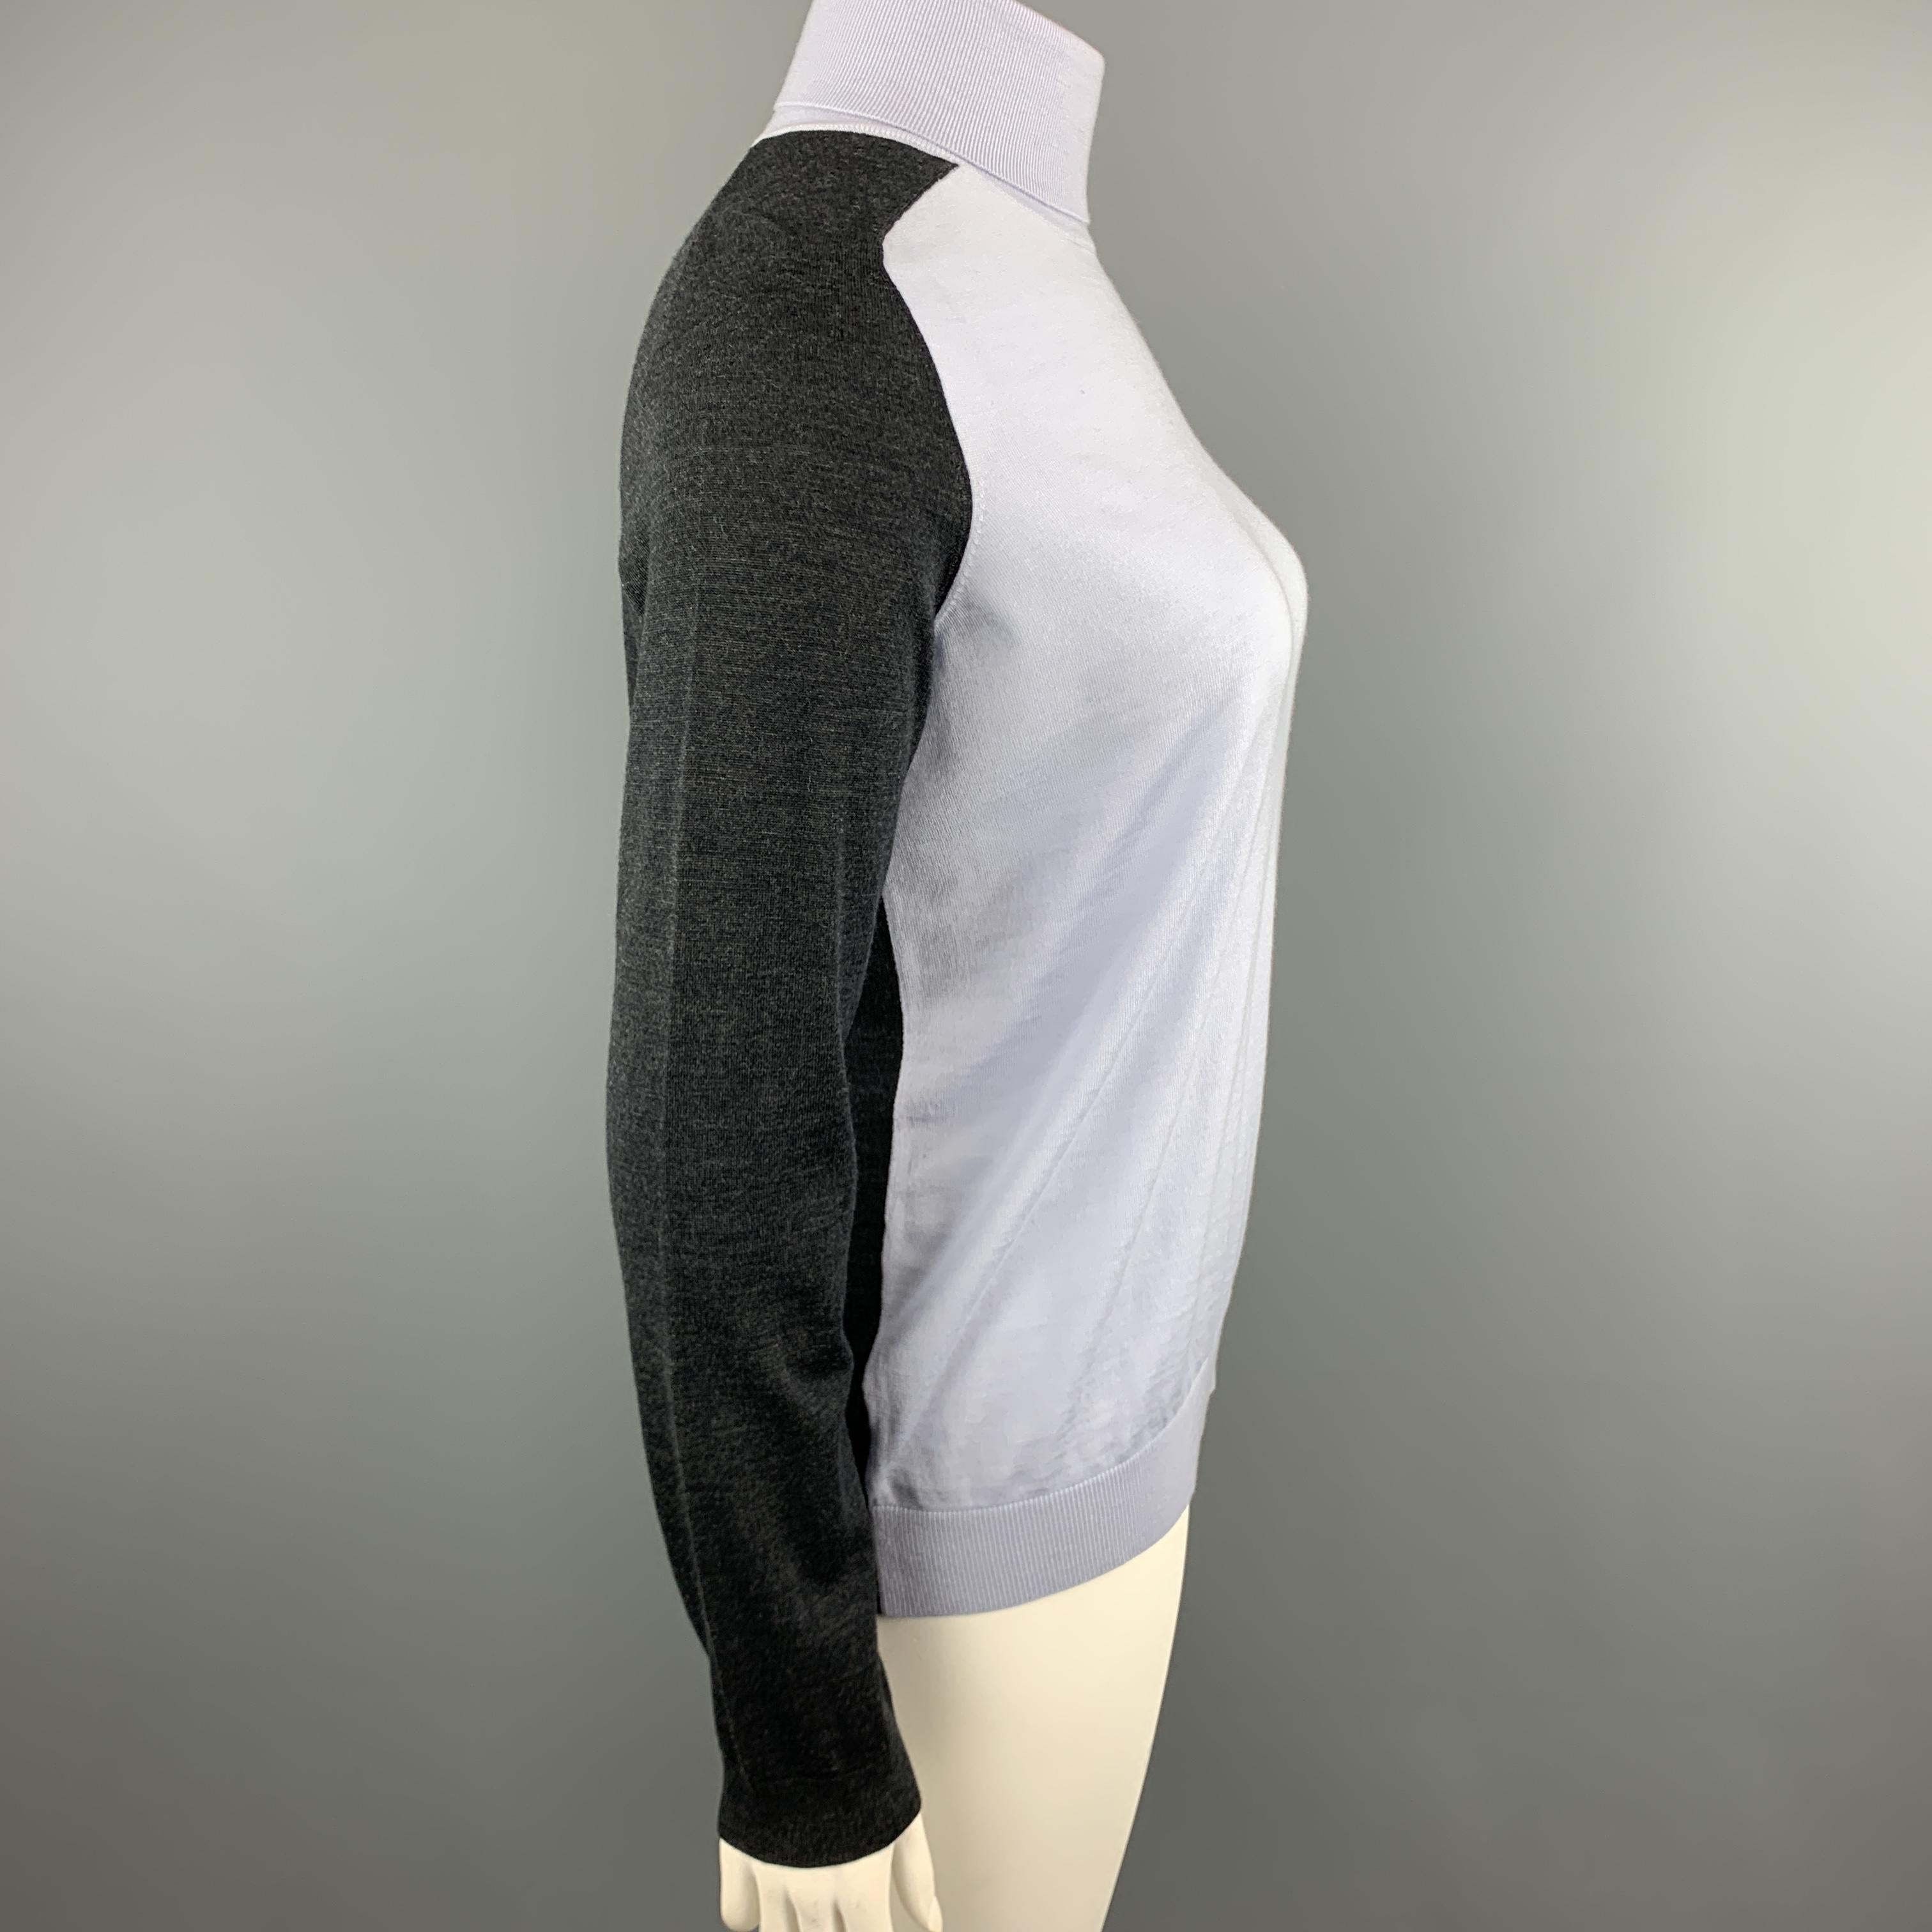 AKRIS turtleneck sweater comes in light blue wool knit with asymmetrical charocal panels. 

Excellent Pre-Owned Condition.
Marked: 12

Measurements:

Shoulder: 16 in.
Bust: 42 in.
Sleeve: 25 in.
Length:  26 in.